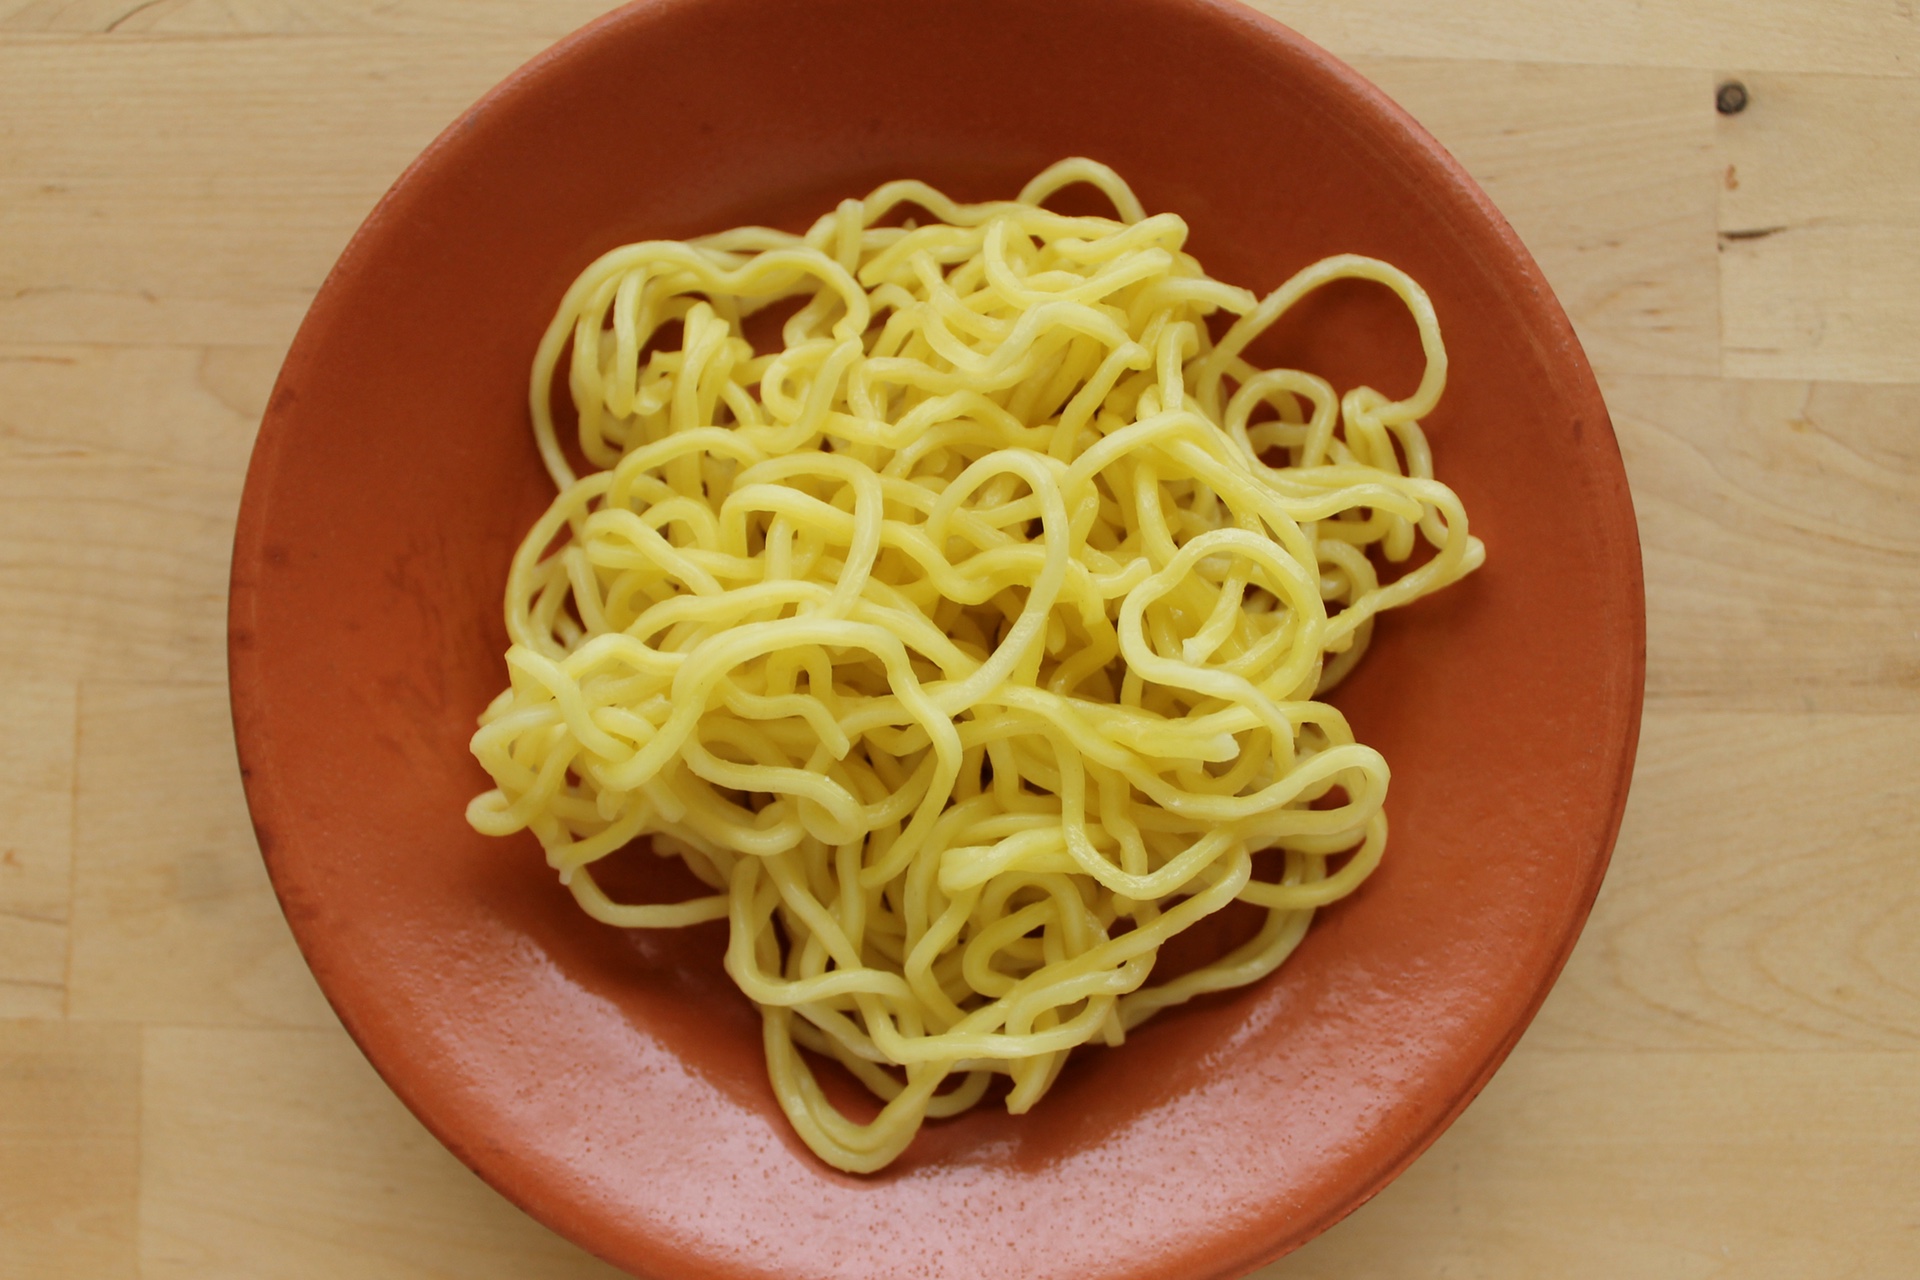 Sun Noodle’s ramen noodles are perfectly springy with just the right amount of chew.